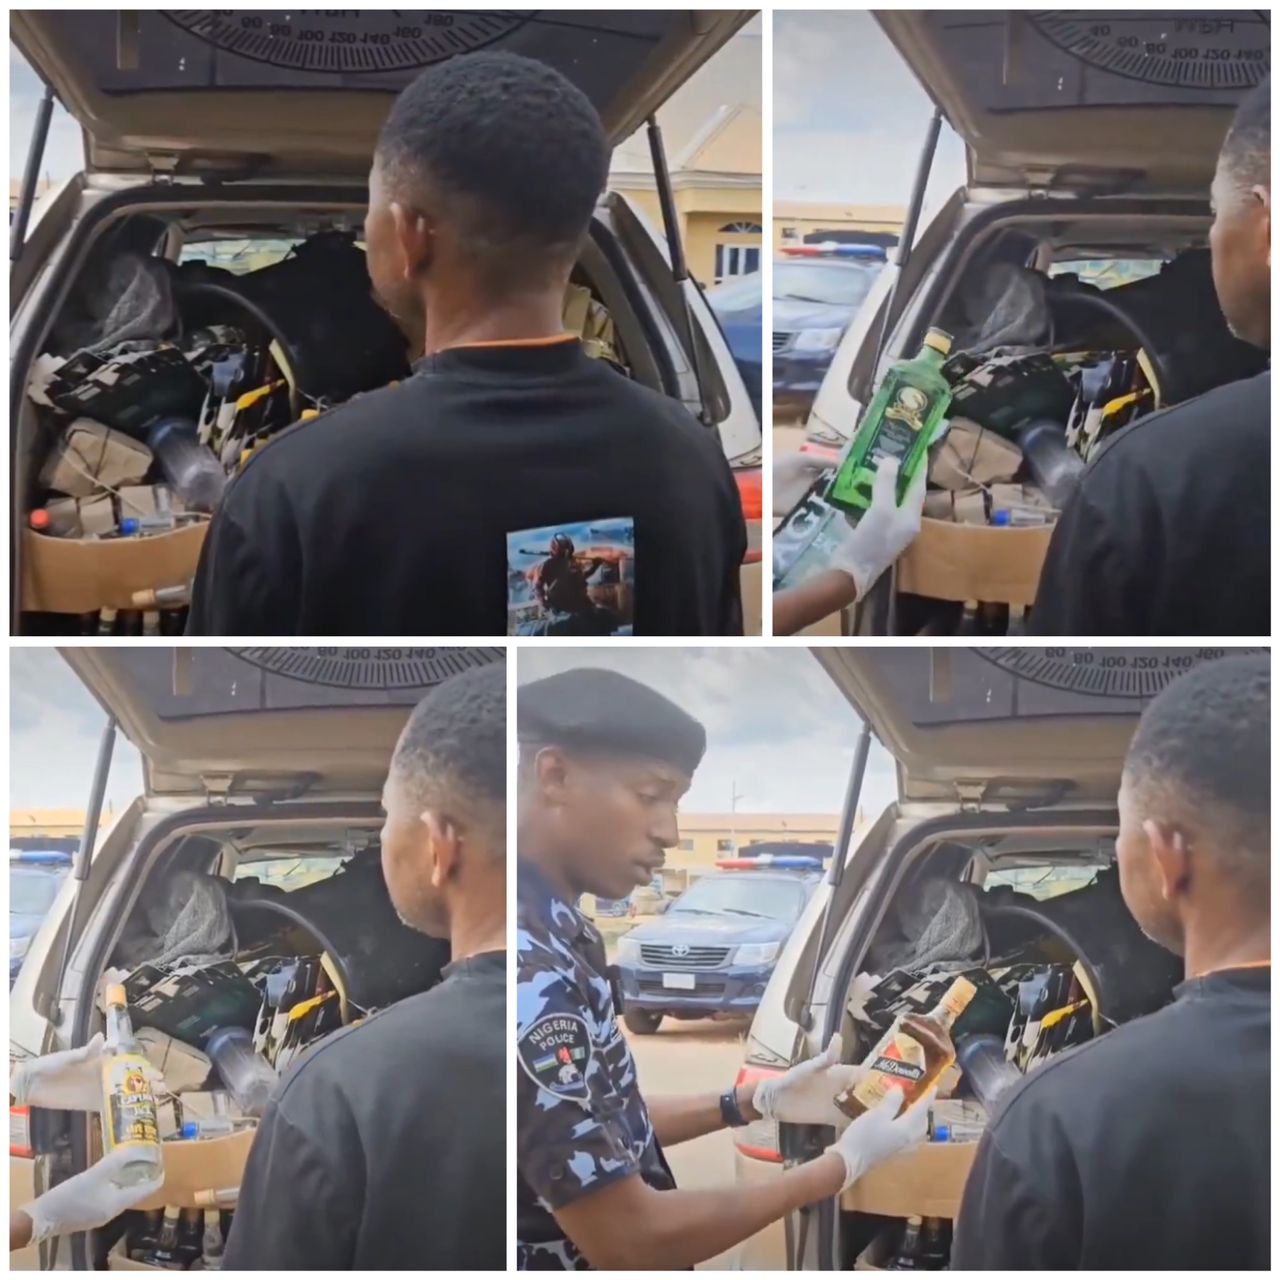 Fake alcoholic drink producer arrested in Delta state.